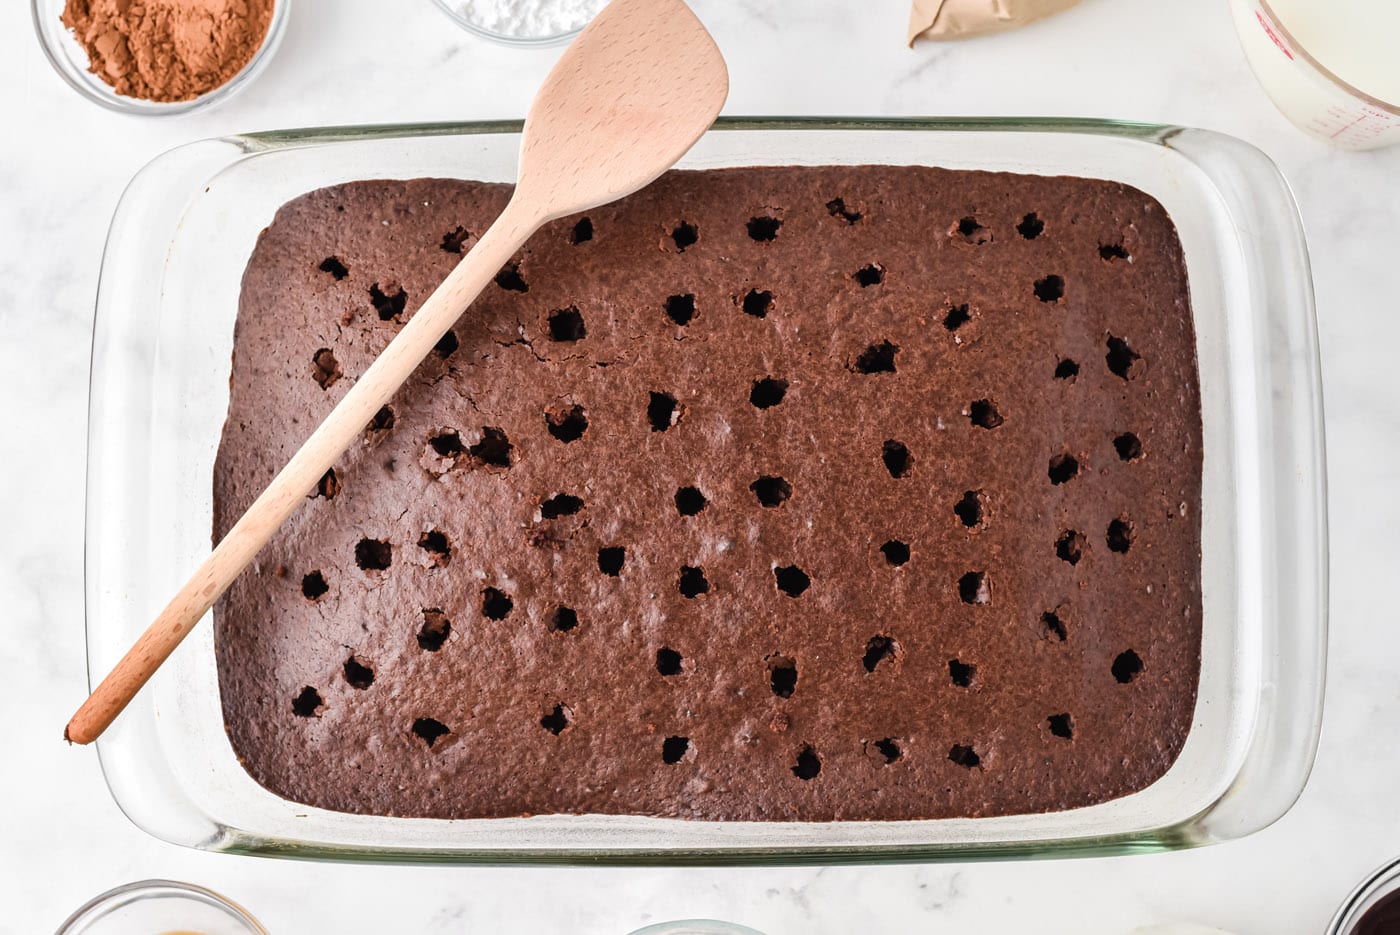 holes poked in a chocolate cake